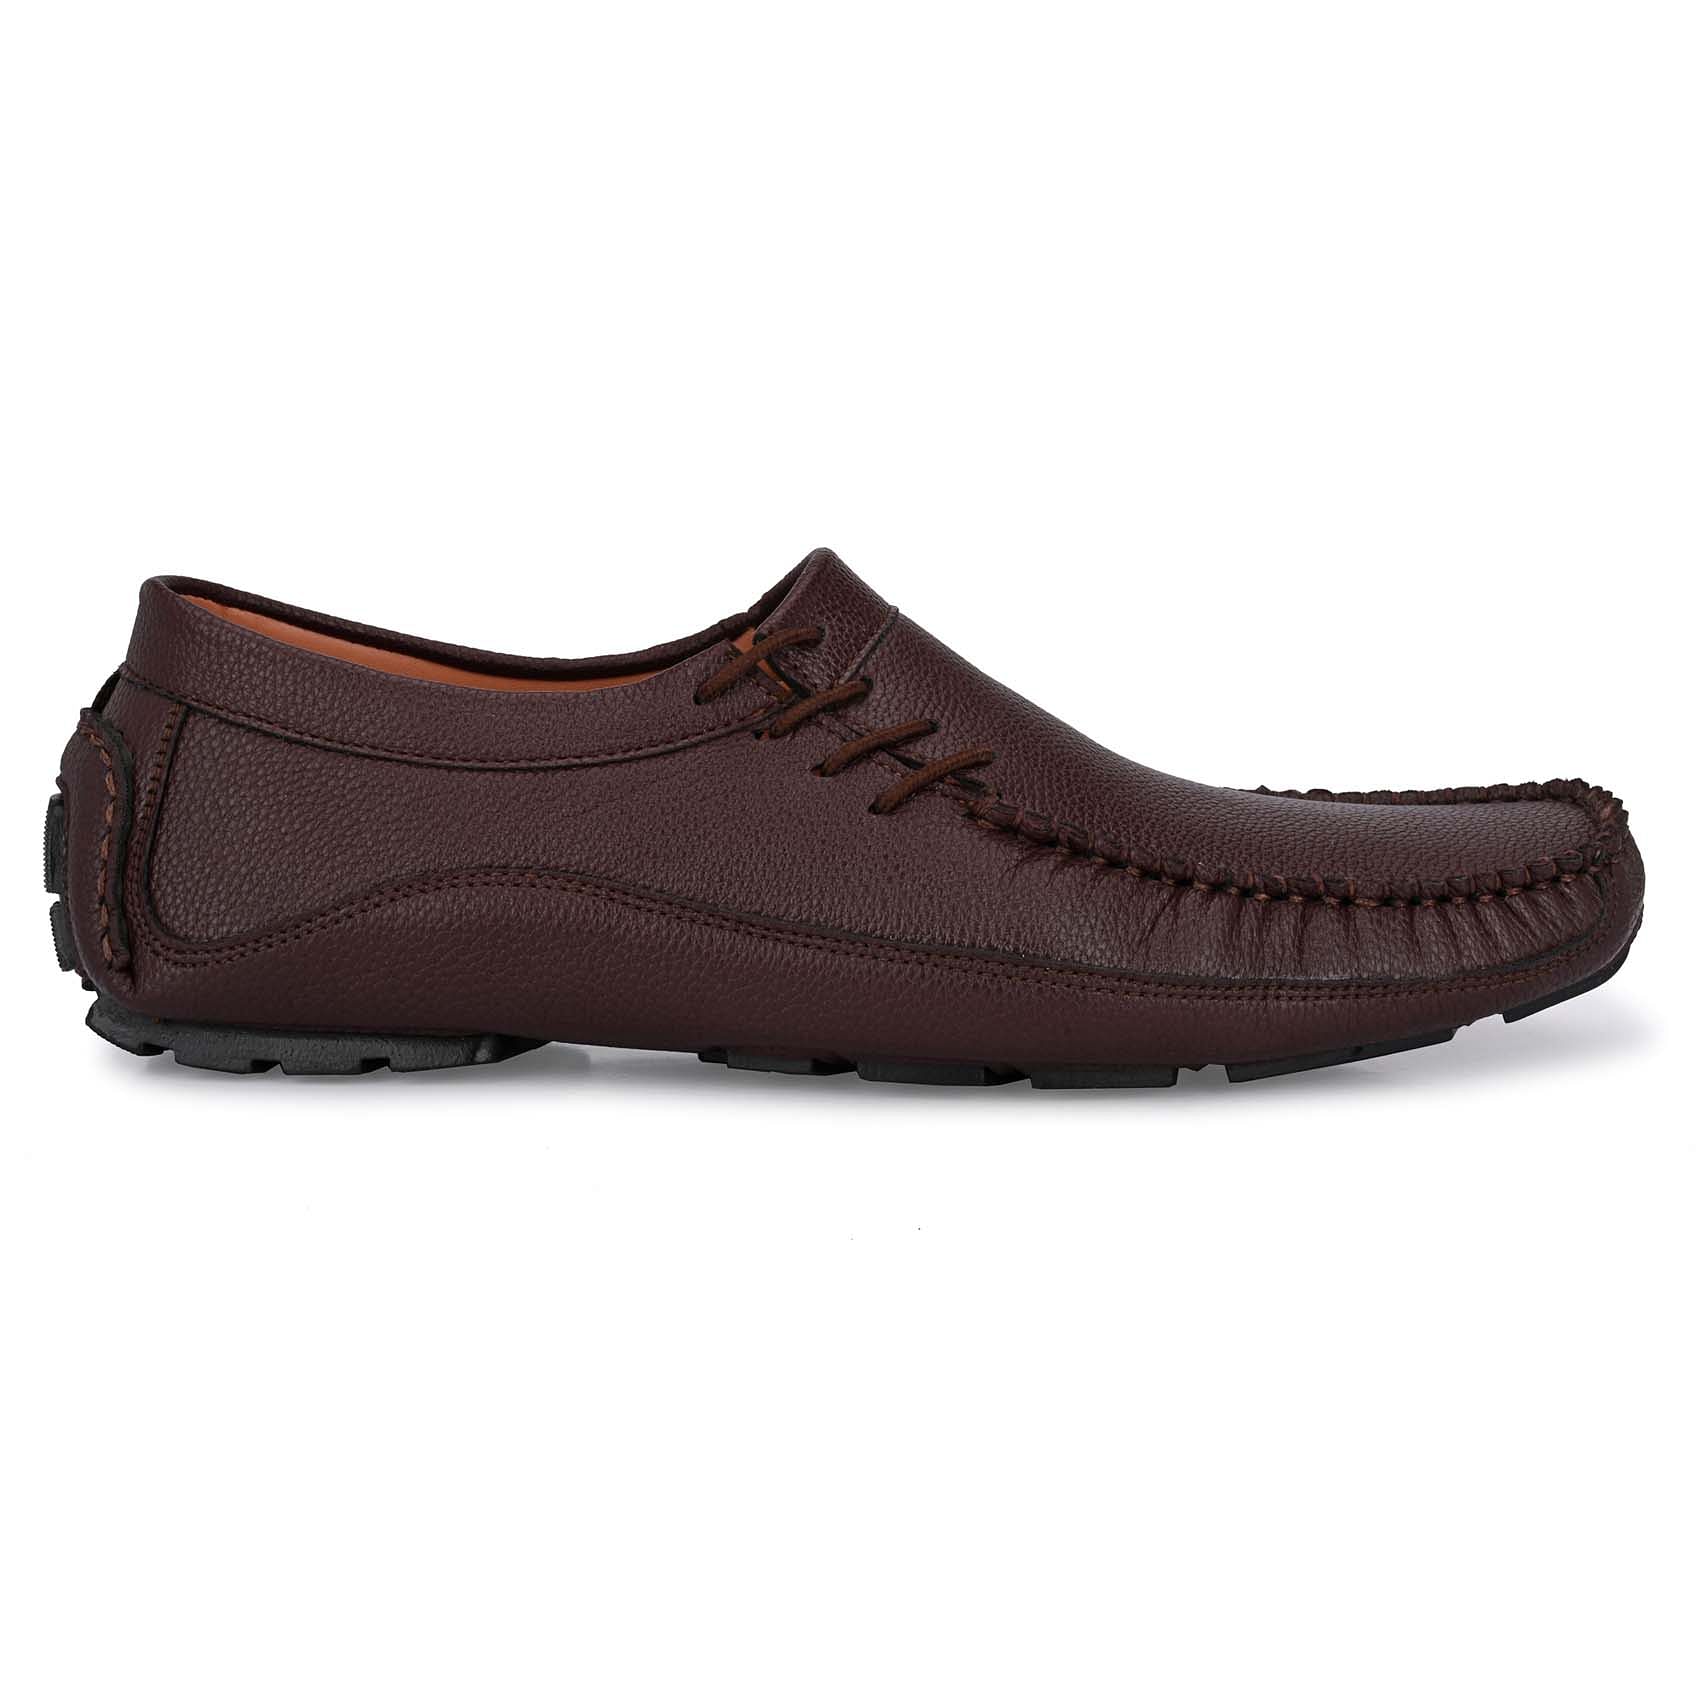 Pair-it Men's Loafers Shoes - Brown-LZ-Loafer114